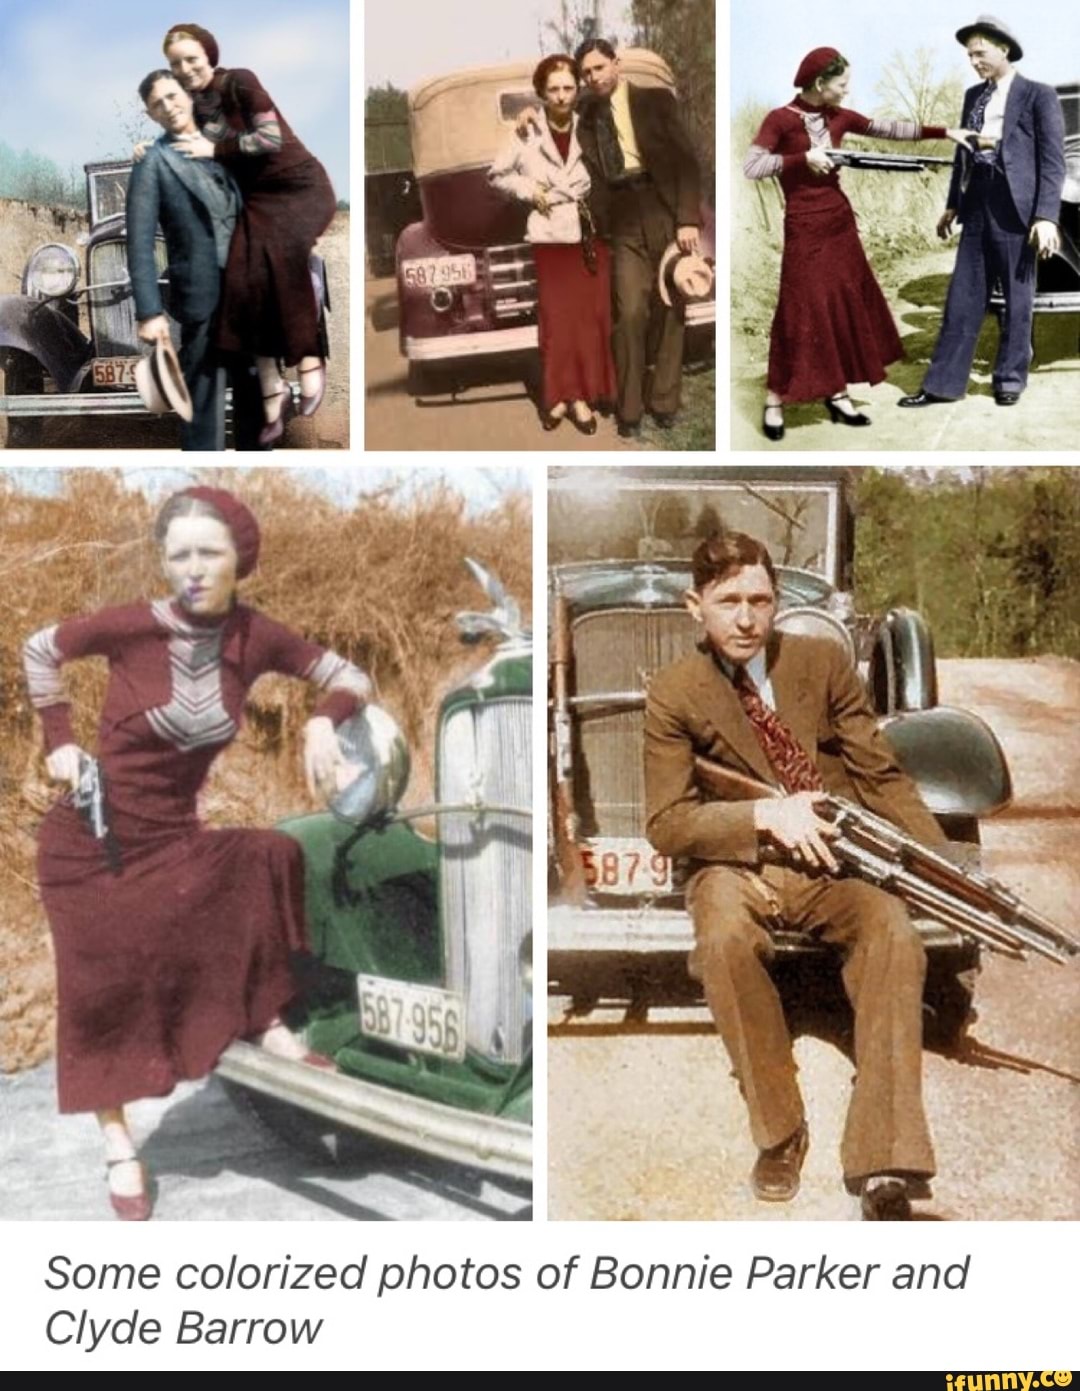 Some colorized photos of Bonnie Parker and Clyde Barrow.